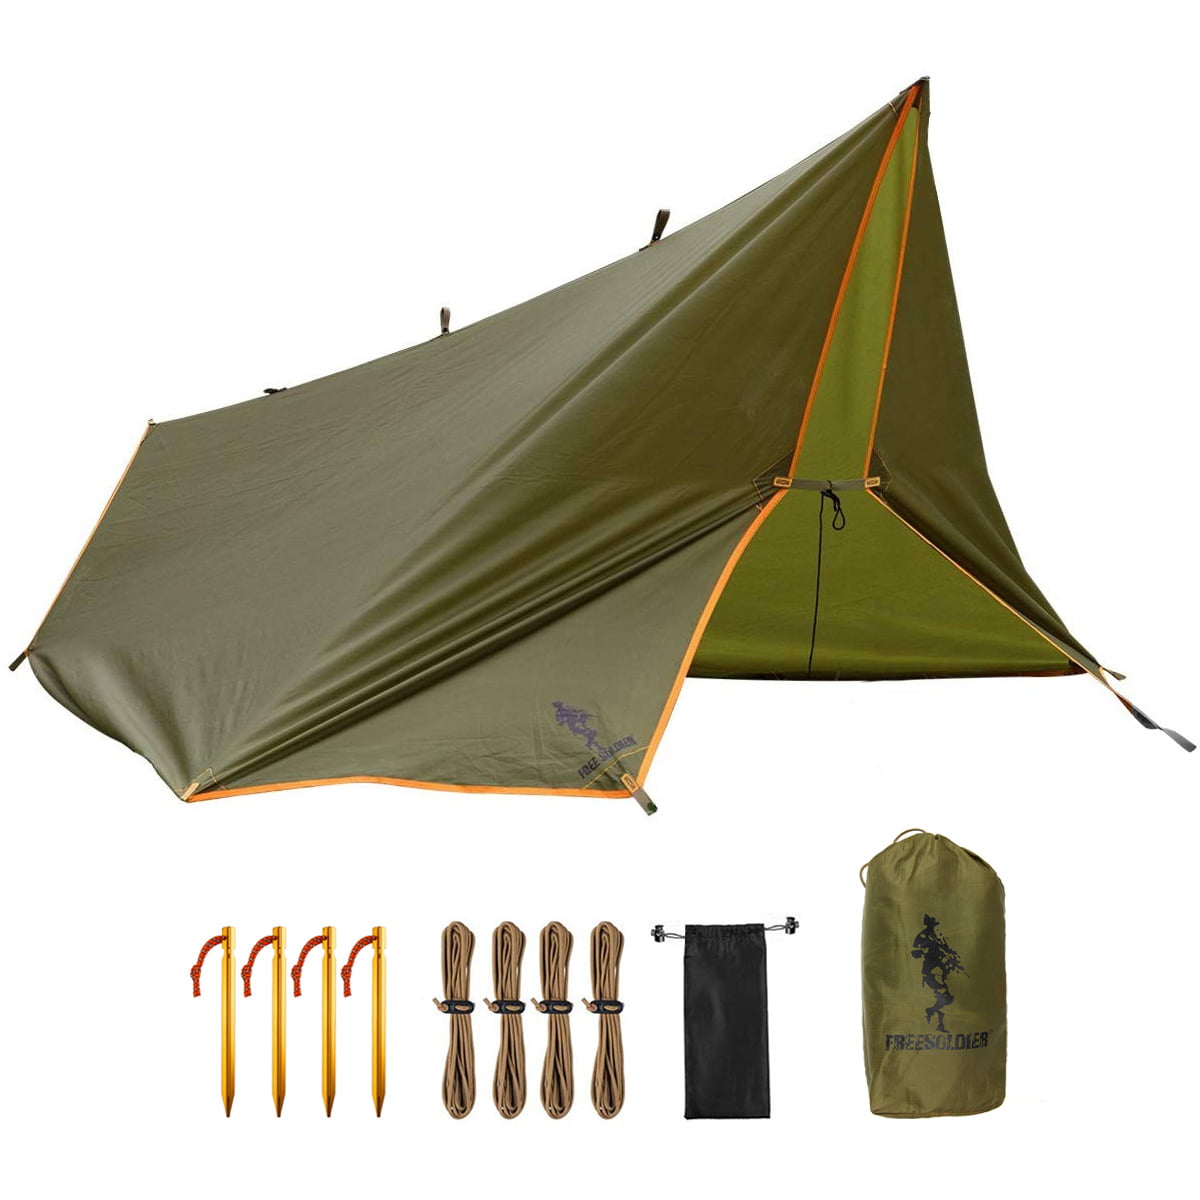 Details about   Tent TARPAULIN Waterproof Awning Tarpaulin Camping Shelter Tarp 3x3M with Inserts show original title 